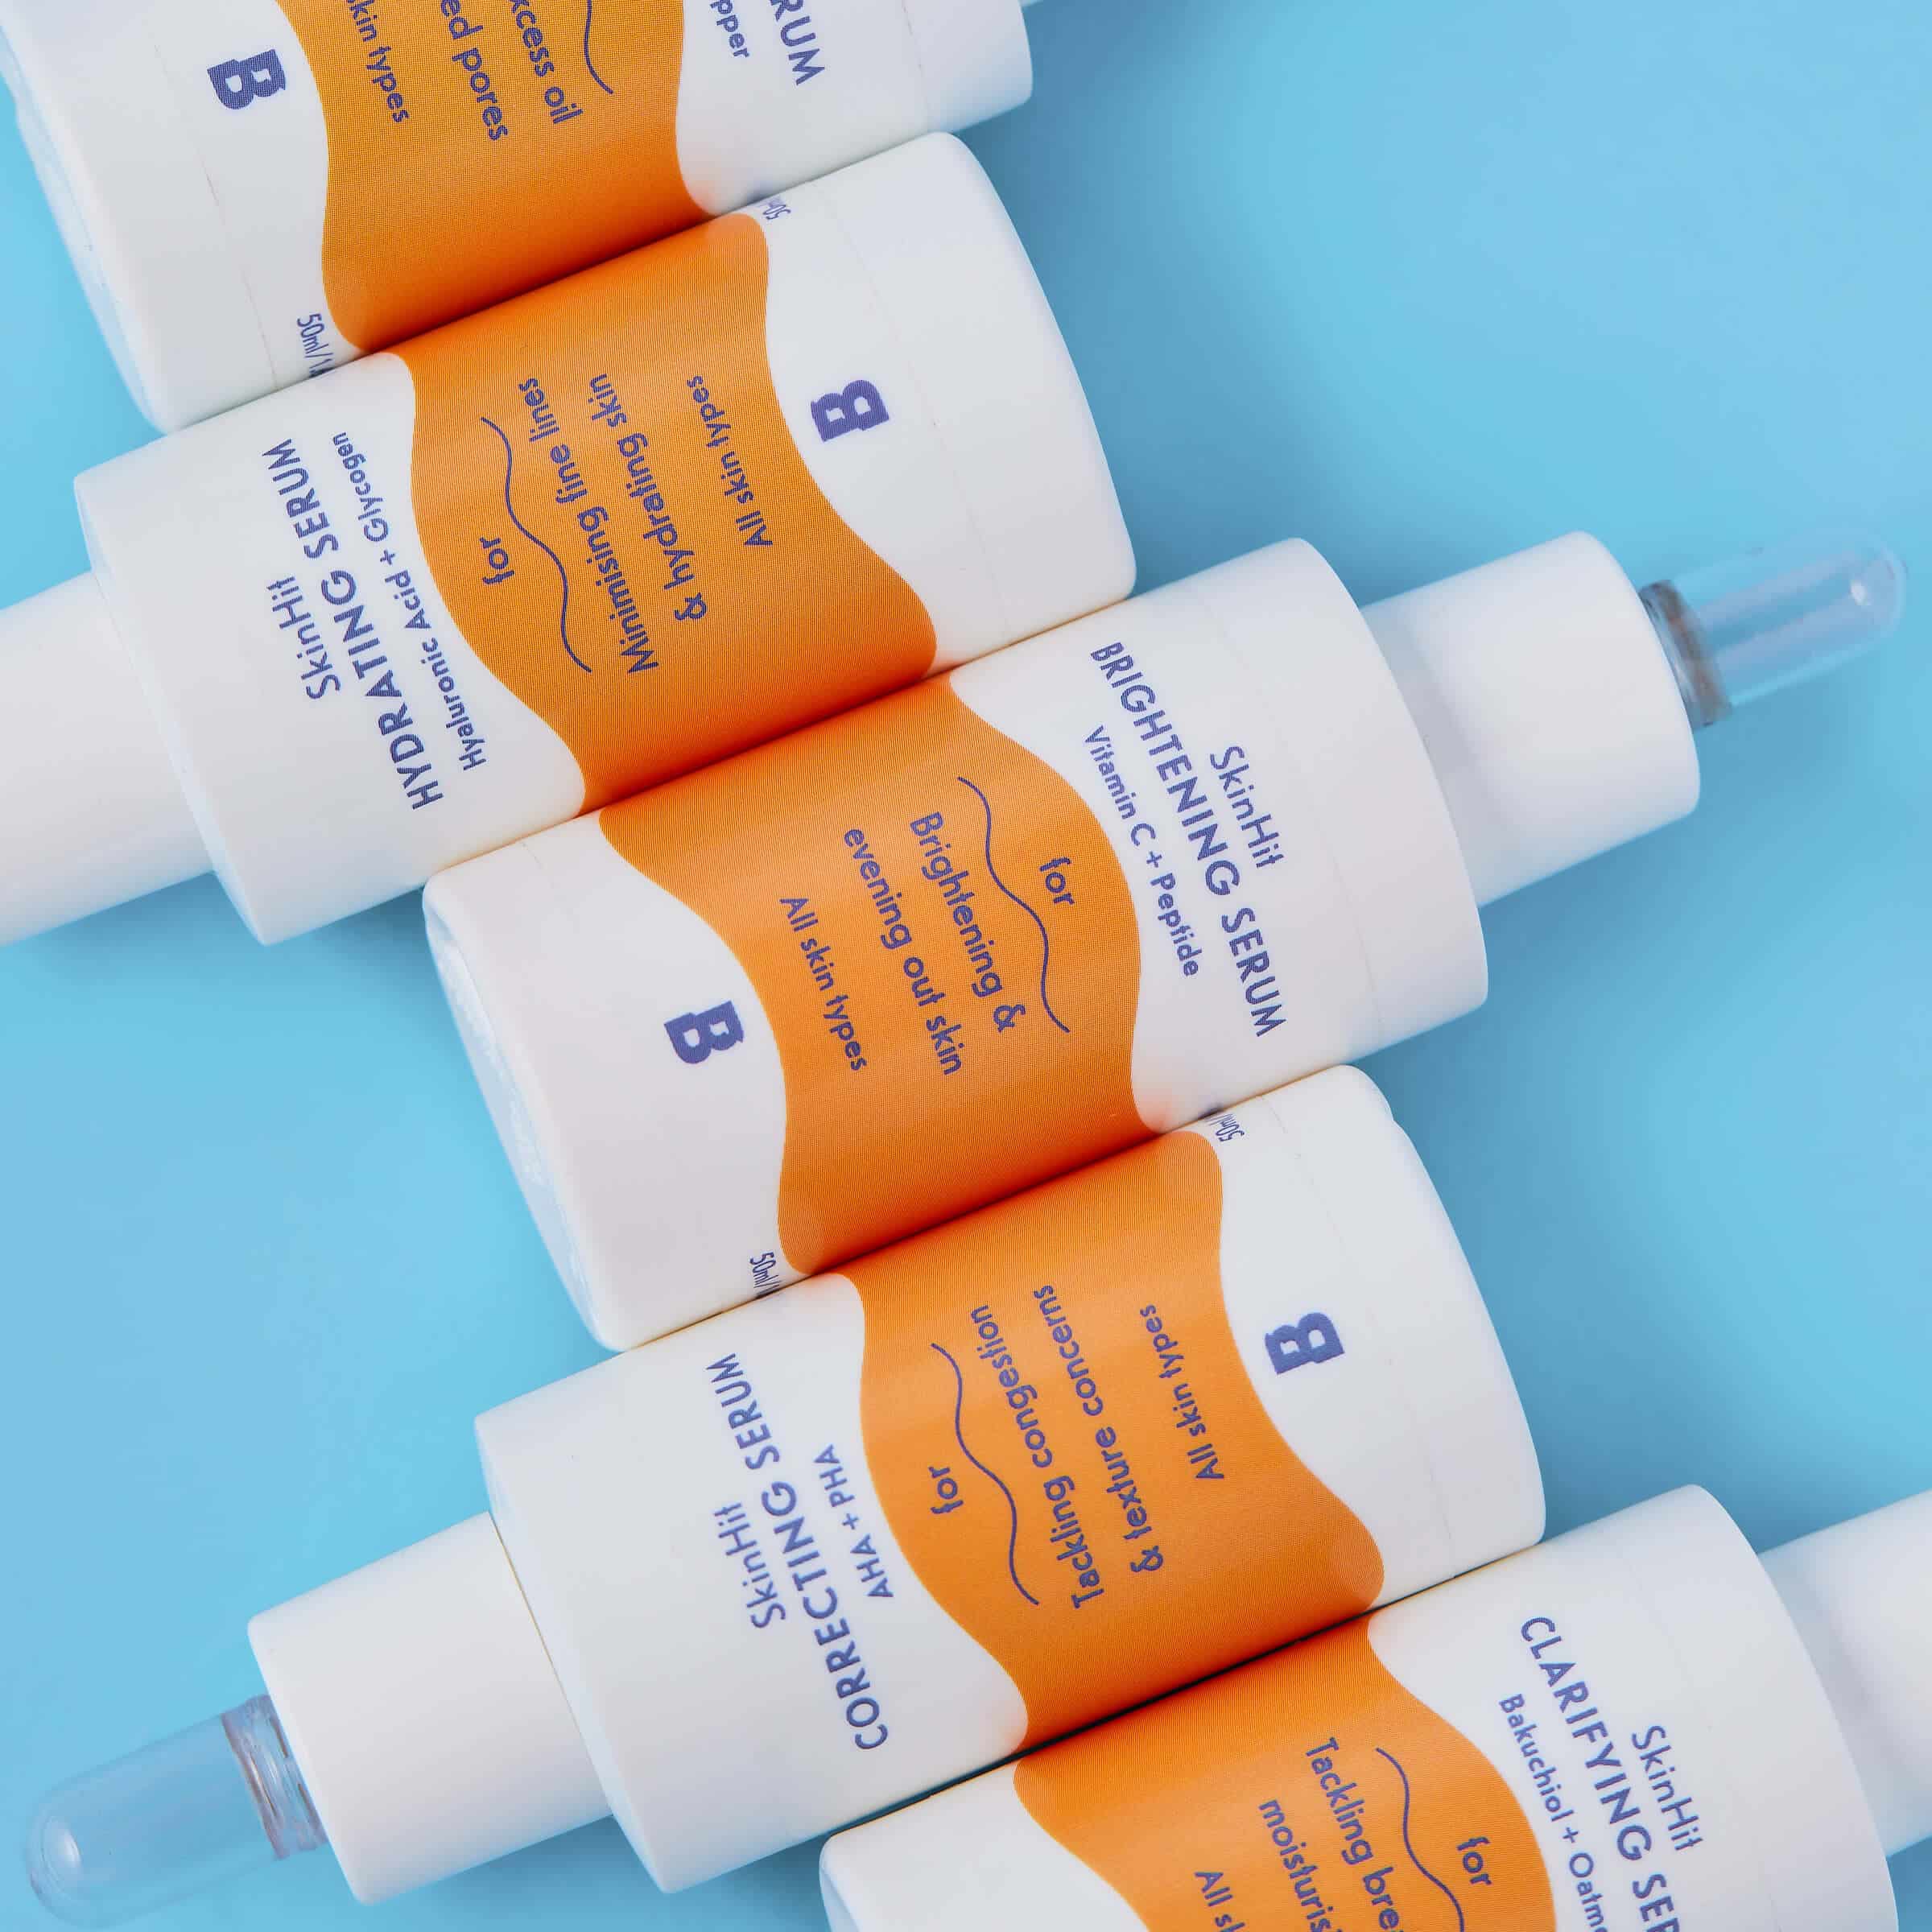 These Serums Transformed My Hormonal Acne Skin